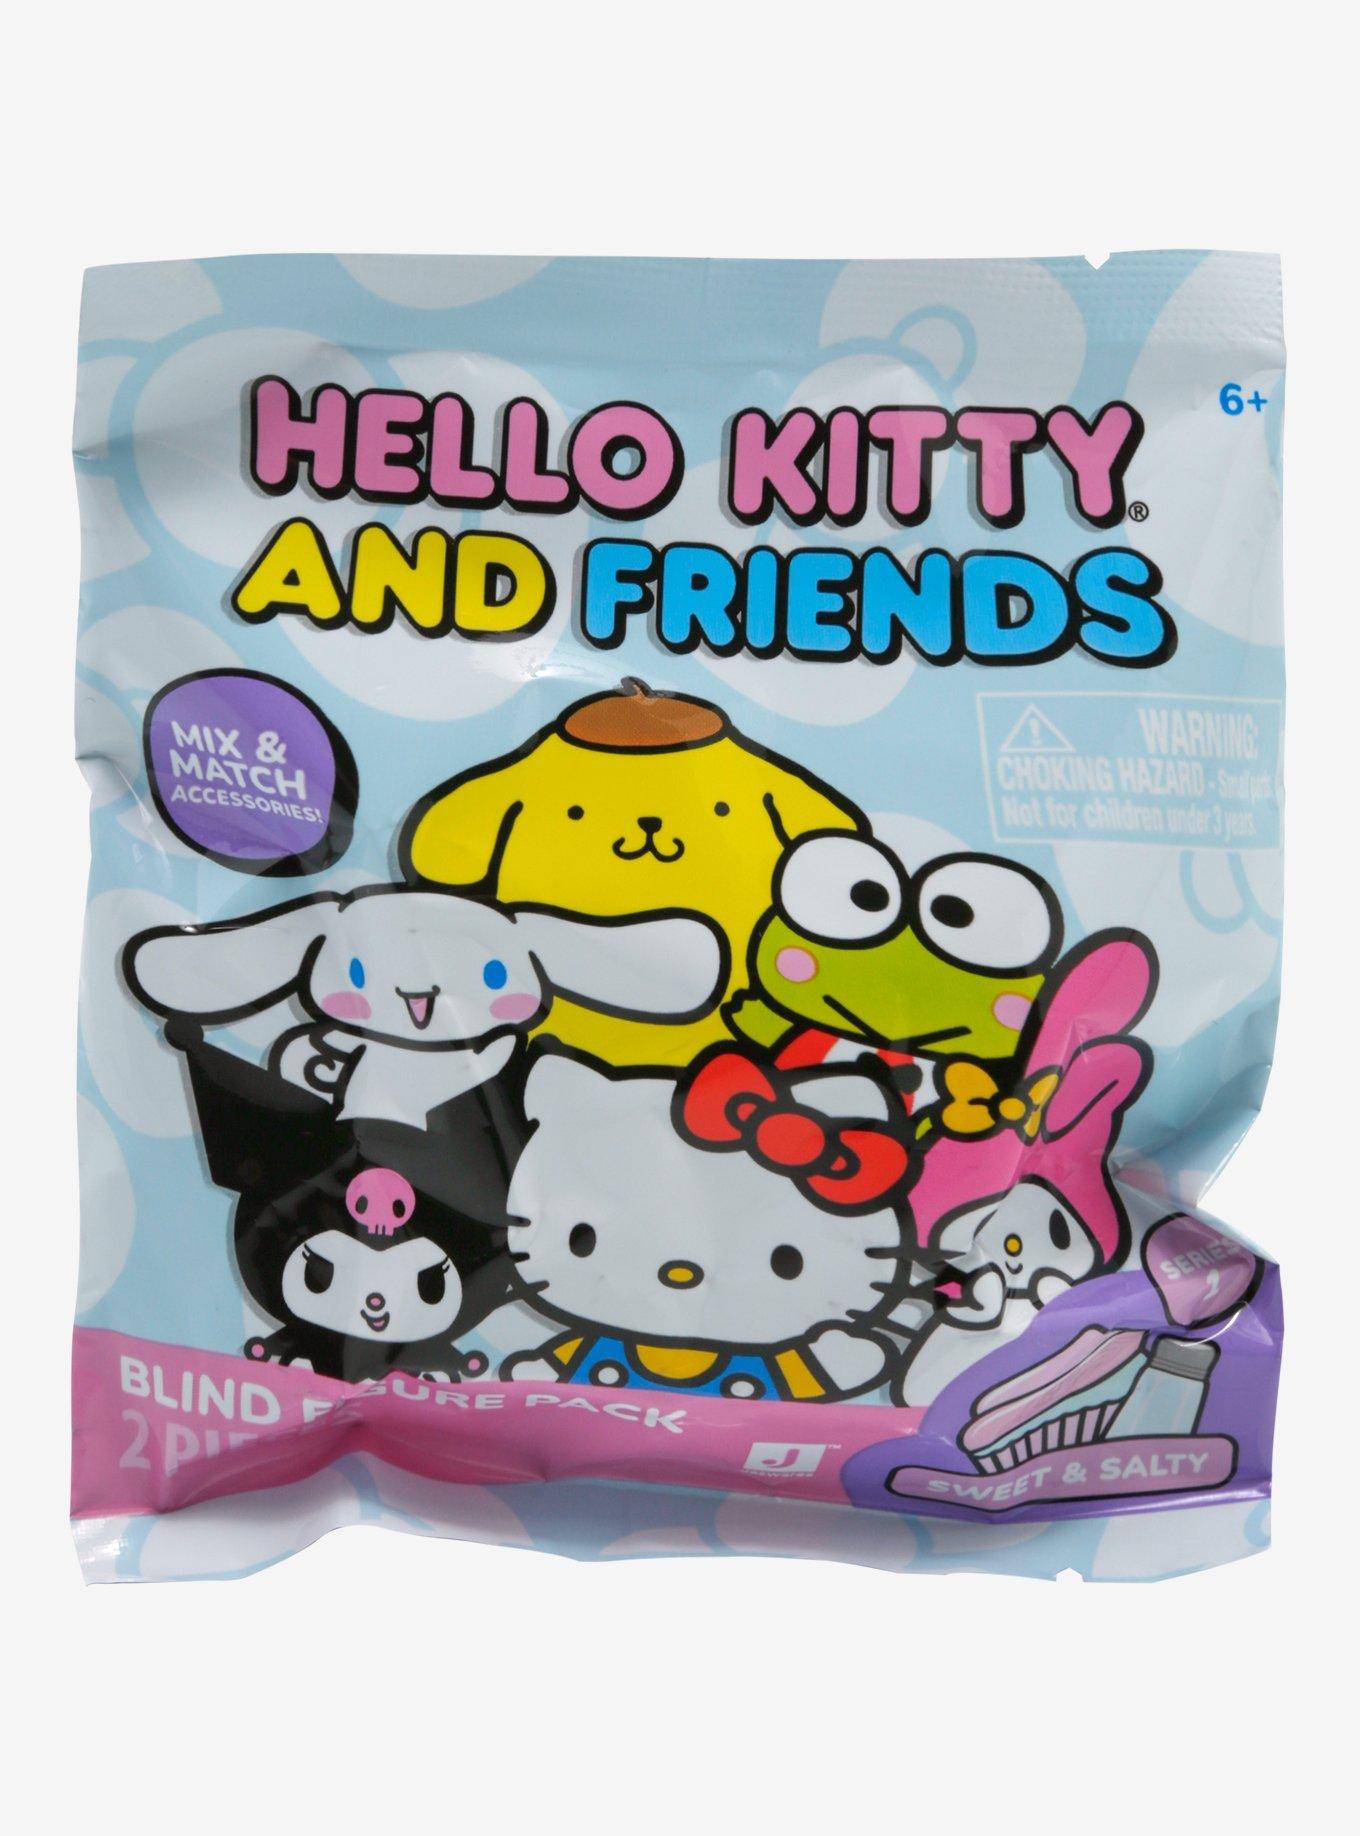 Living A Doll's Life : *REVIEW* Hello Sanrio Mystery Snack Box